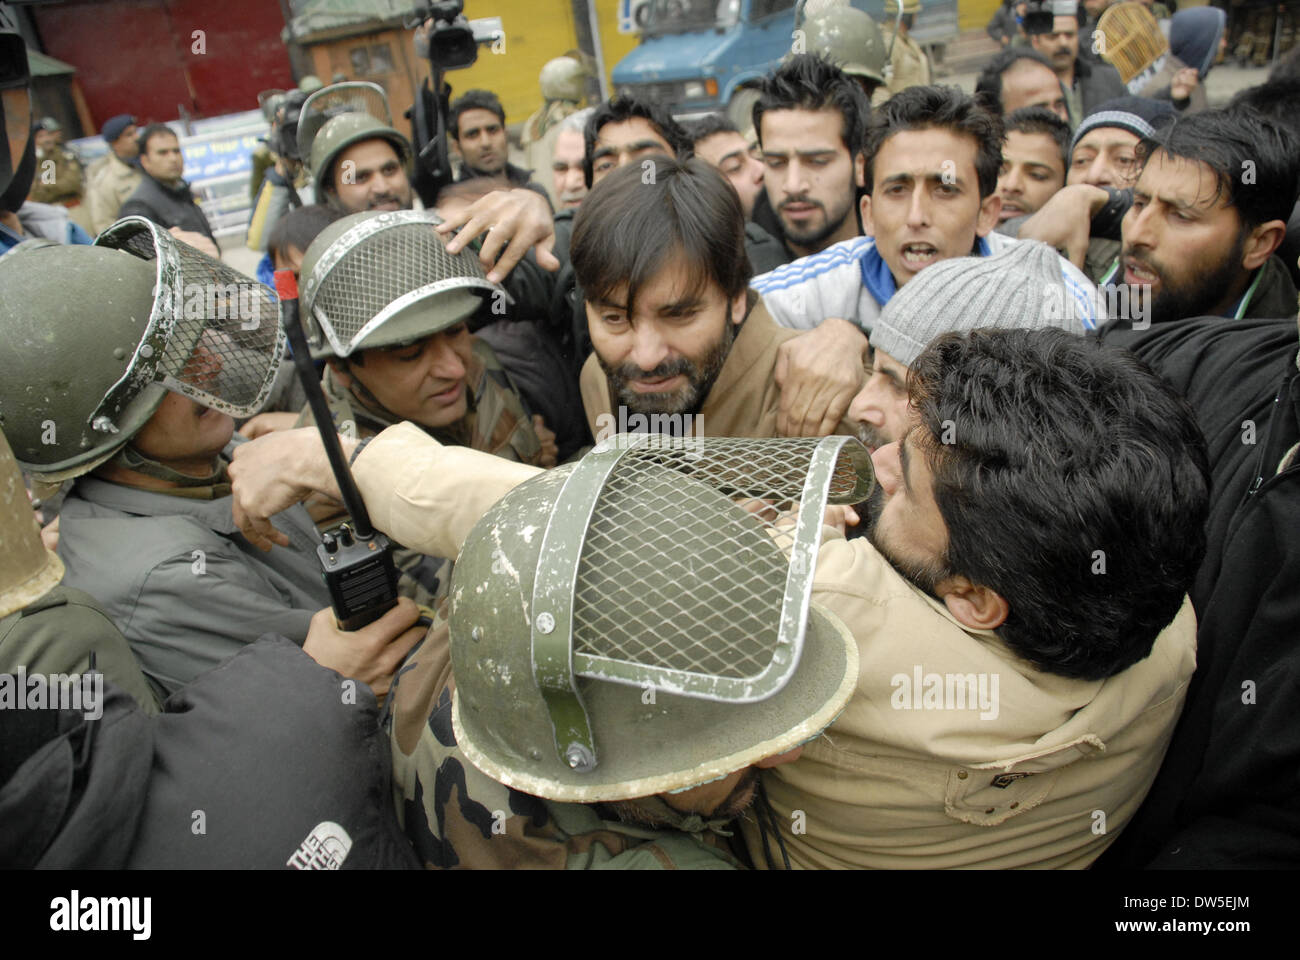 Srinagar, Indian Administered Kashmir. 28th Feb, 2014 supporters of pro-independence Jammu and Kashmir Libration Front (JKLF) scuffle with police during a protest in Srinagar against a military court verdict that exonerated five Indian army officers involved in the killing of five civilians 14 years ago. The incident occured in Pathribal village days after the killing of 35 Sikhs in the remote village of Chattisinghpora in 2000(Sofi Suhail/ Alamy Live News) Stock Photo